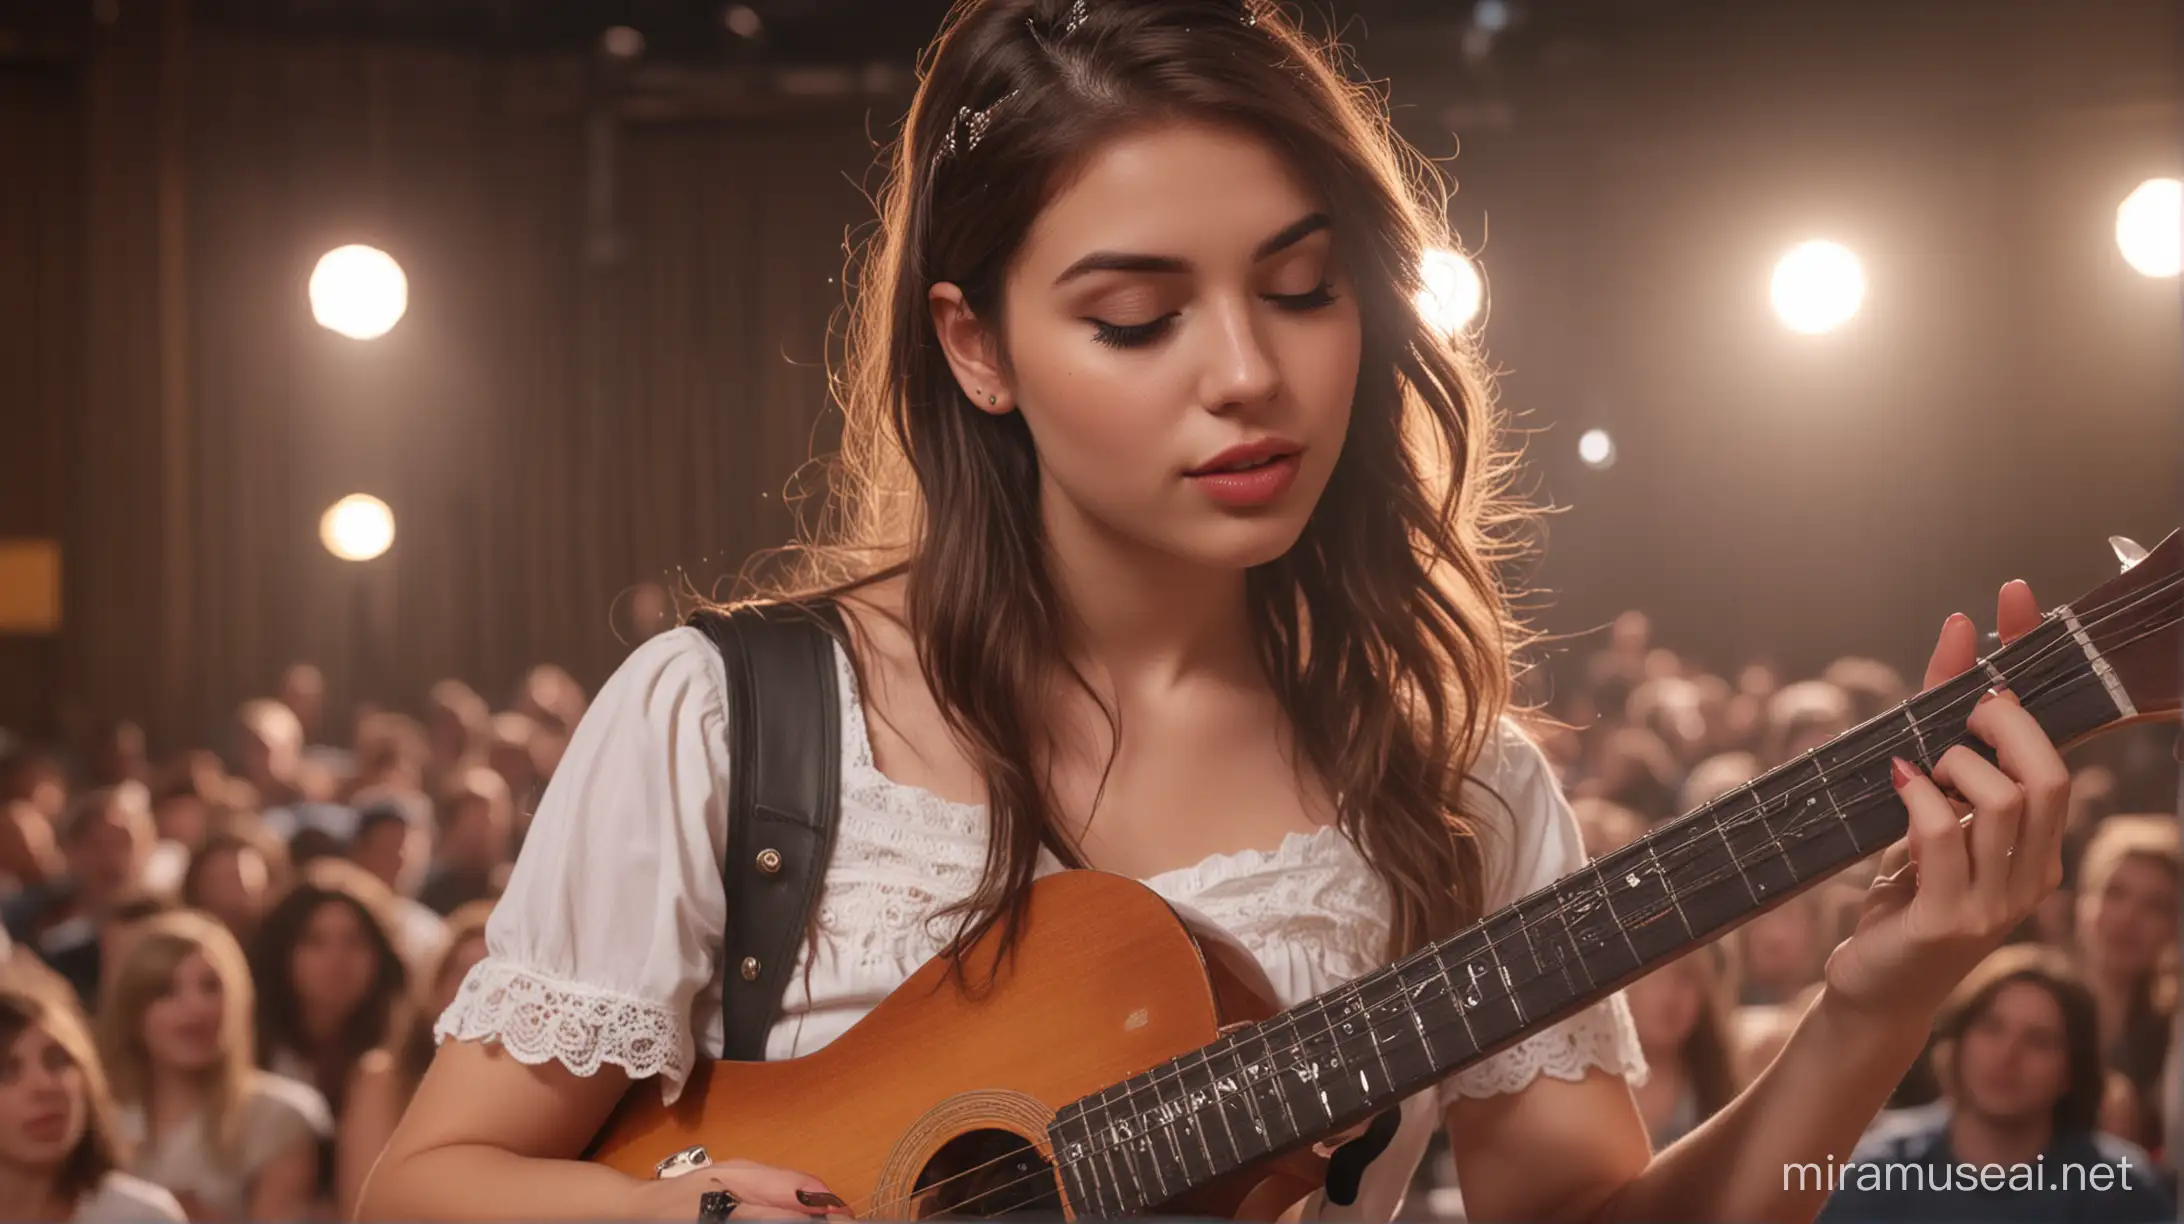 Beautiful Woman Playing Guitar in Auditorium Concert with Detailed Features and Delicate Aesthetic